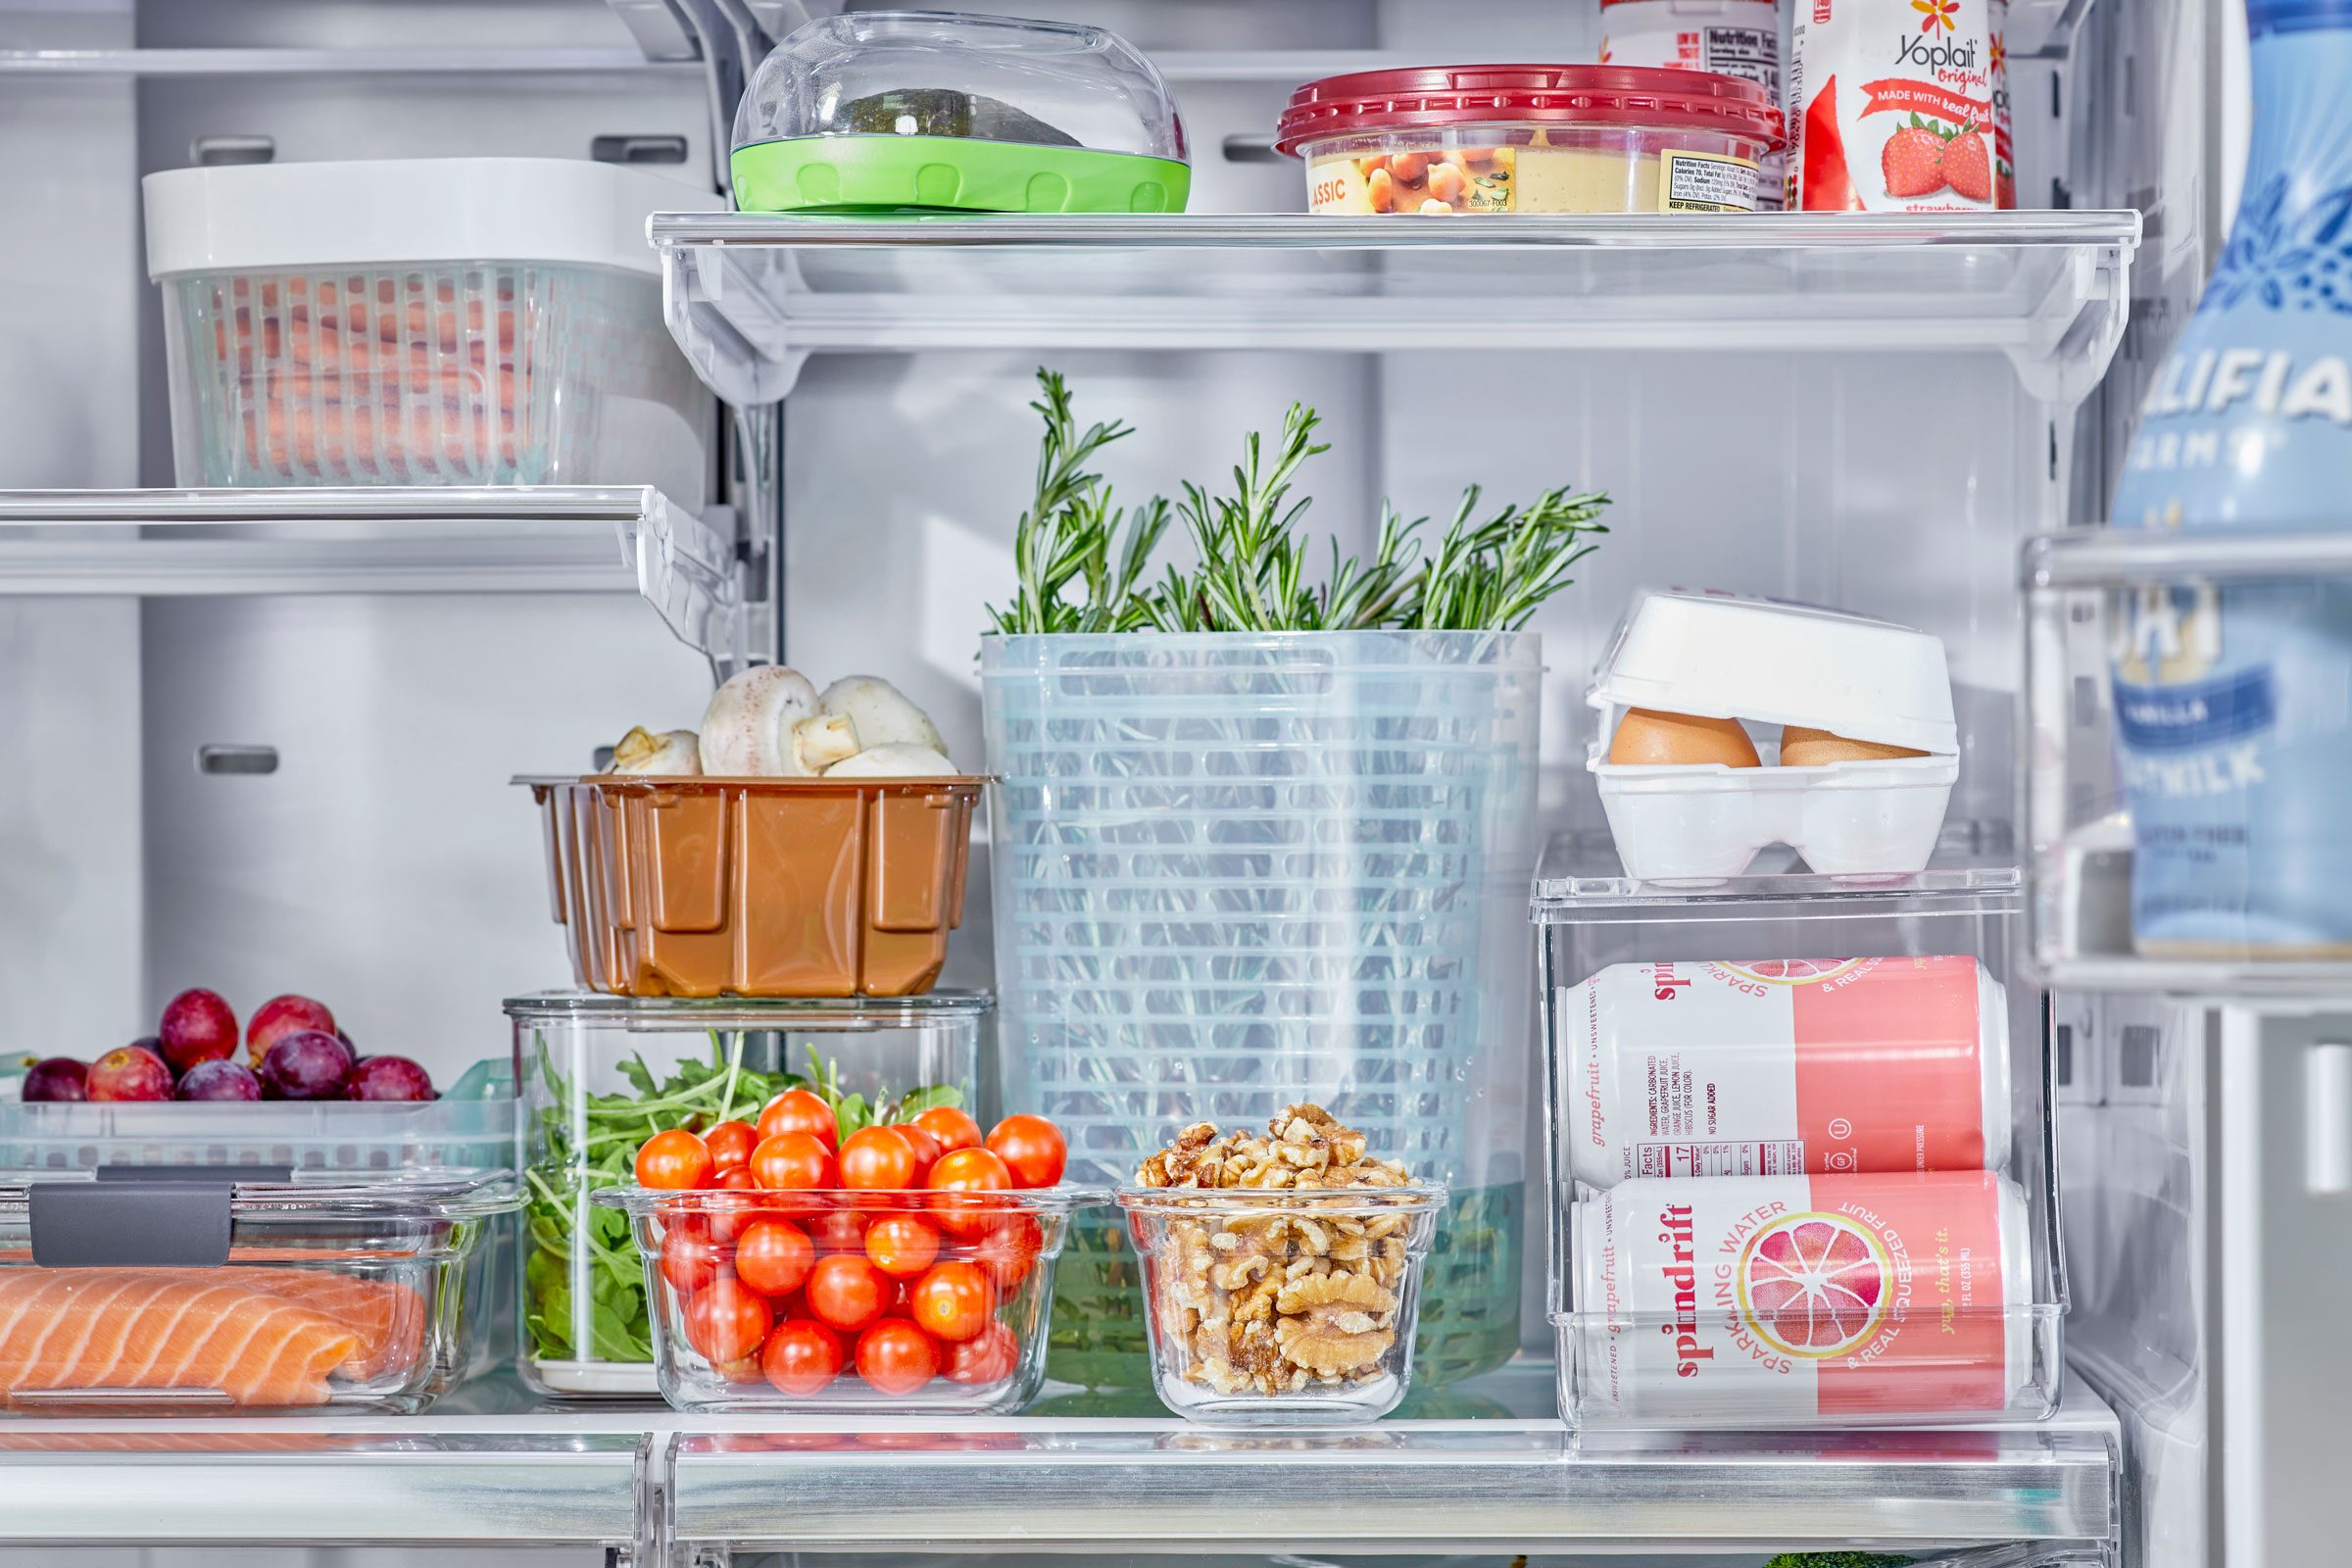 What Do Nutritionists Eat? We Toured Inside a Dietitian's Fridge and Found These 15 Groceries